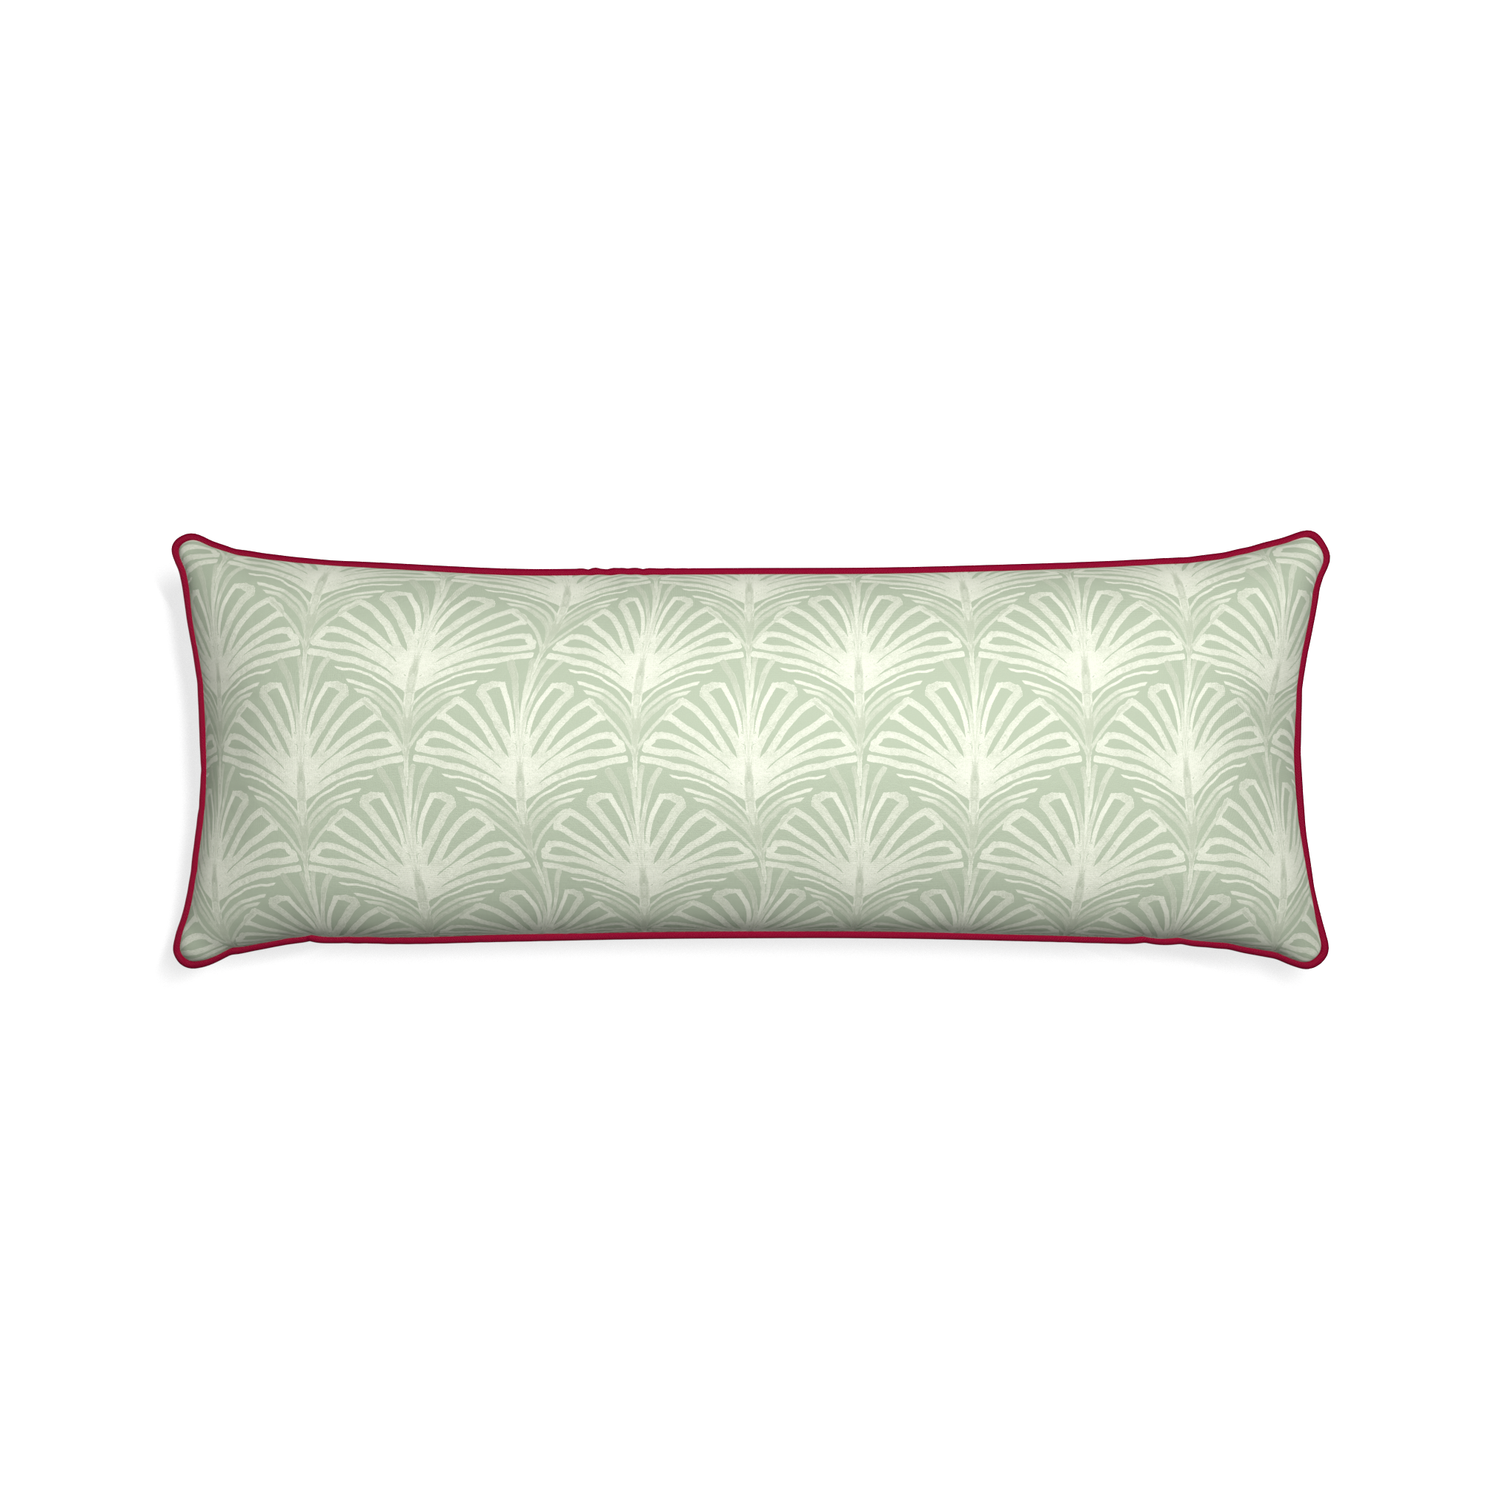 Xl-lumbar suzy sage custom pillow with raspberry piping on white background